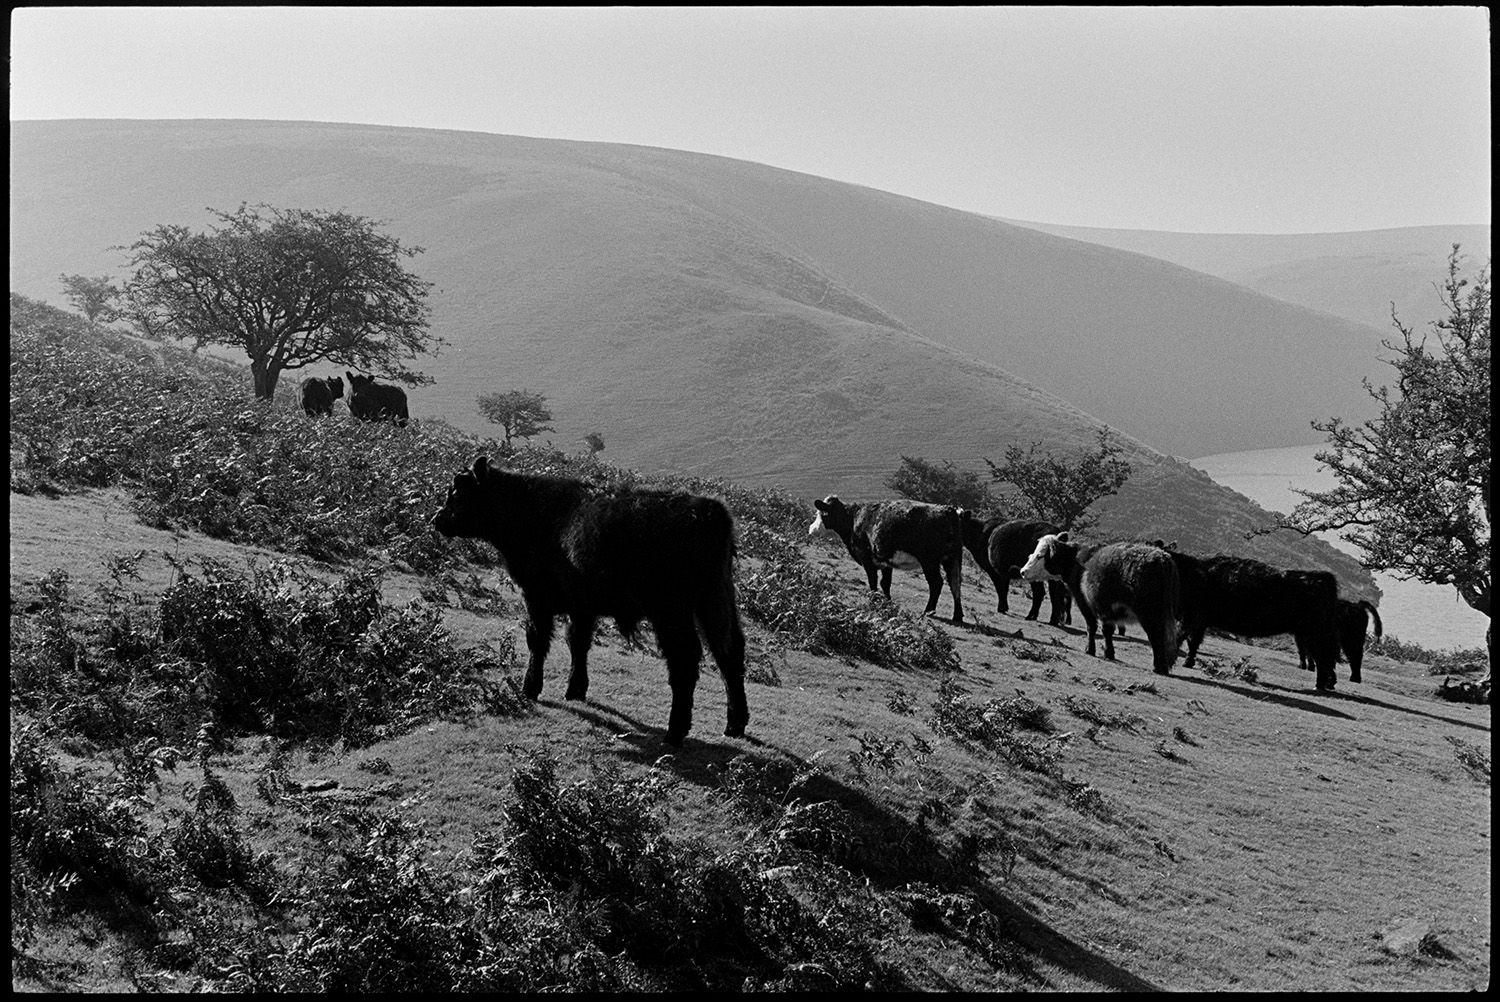 Cattle grazing amongst bracken and trees near Meldon on Dartmoor. The hills of the moor can be seen in the background.